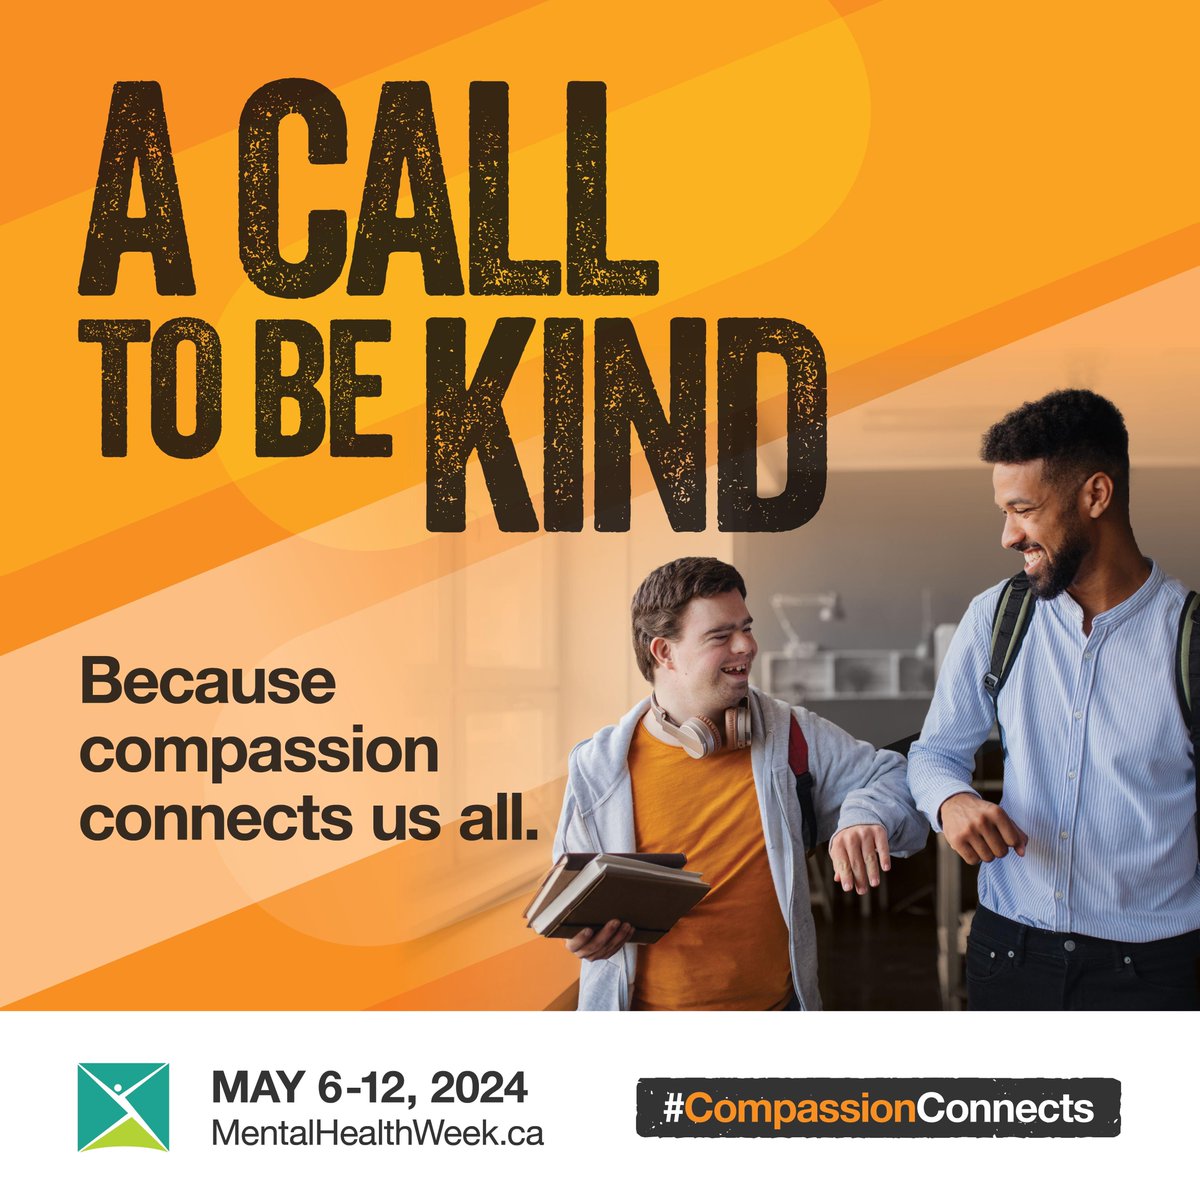 Compassion isn't just about being kind to others, it's about extending that same kindness to ourselves. Visit mentalhealthweek.ca to learn more. #MentalHealthWeek #CompassionConnects